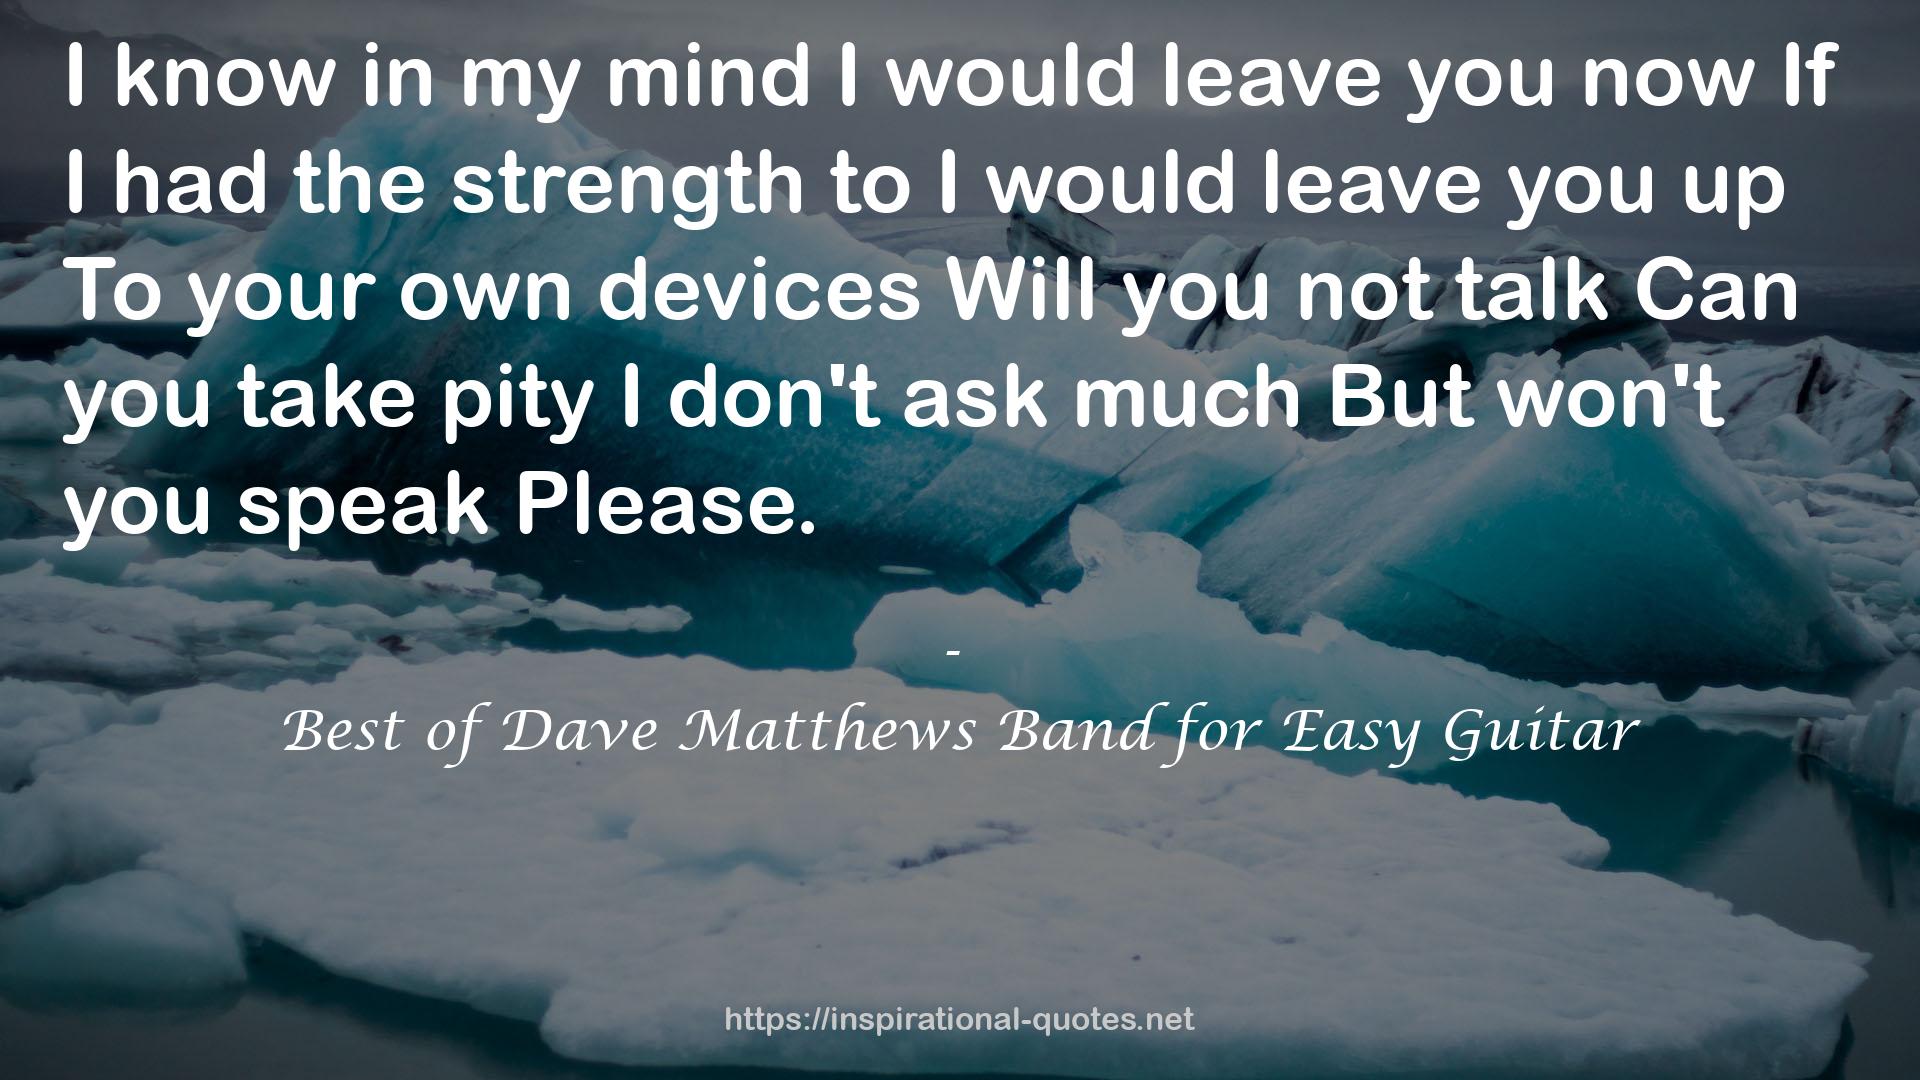 Best of Dave Matthews Band for Easy Guitar QUOTES